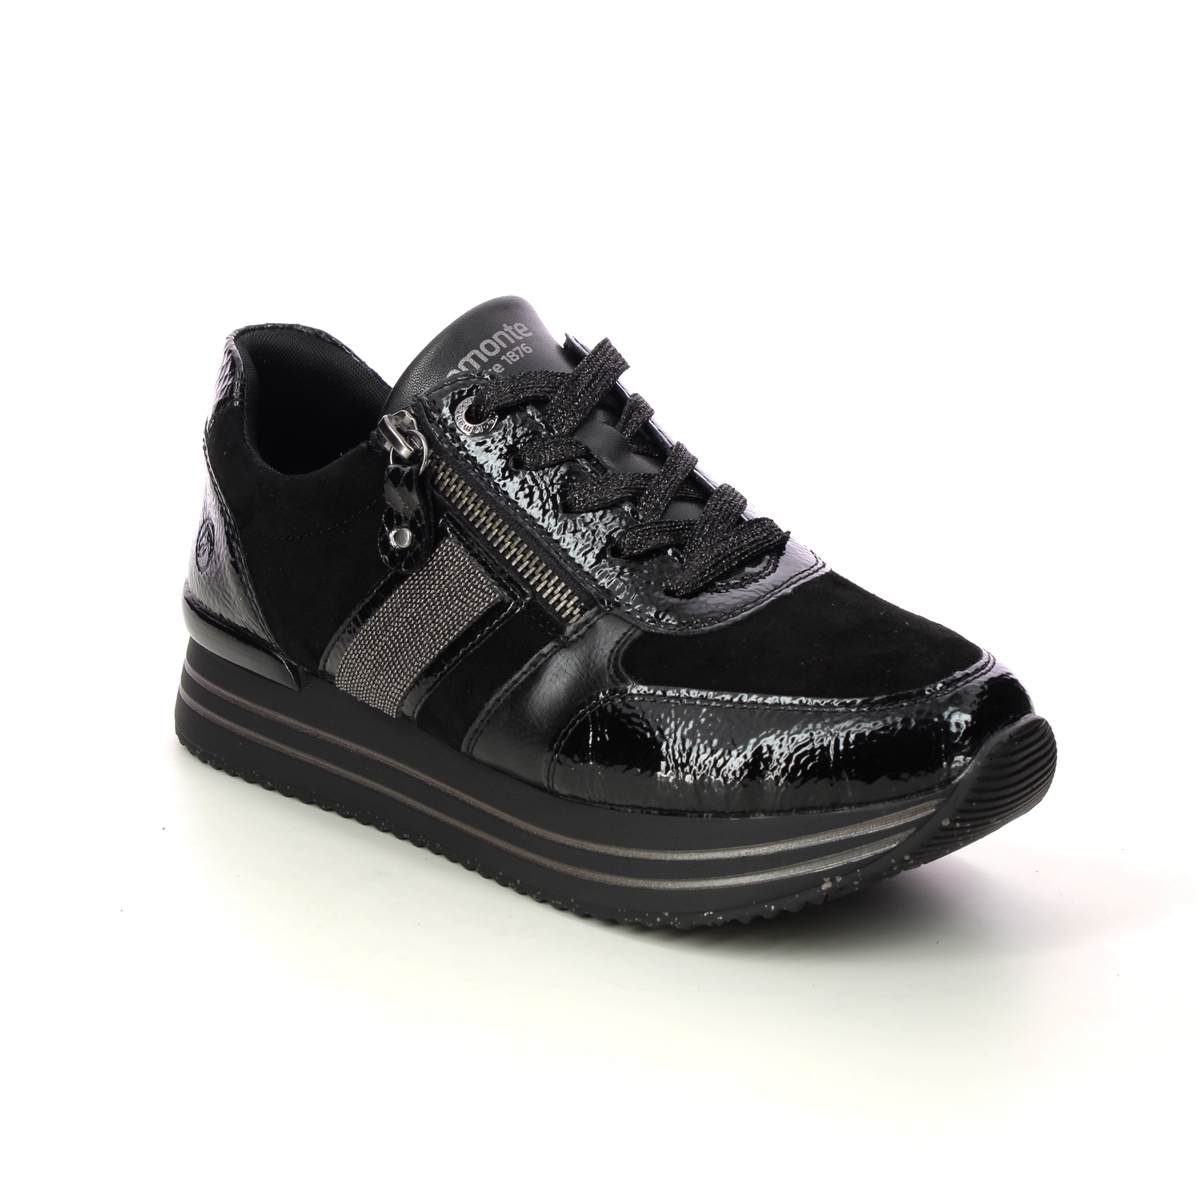 Remonte Ranger Black Patent Suede Womens Trainers D1321-01 In Size 38 In Plain Black Patent Suede